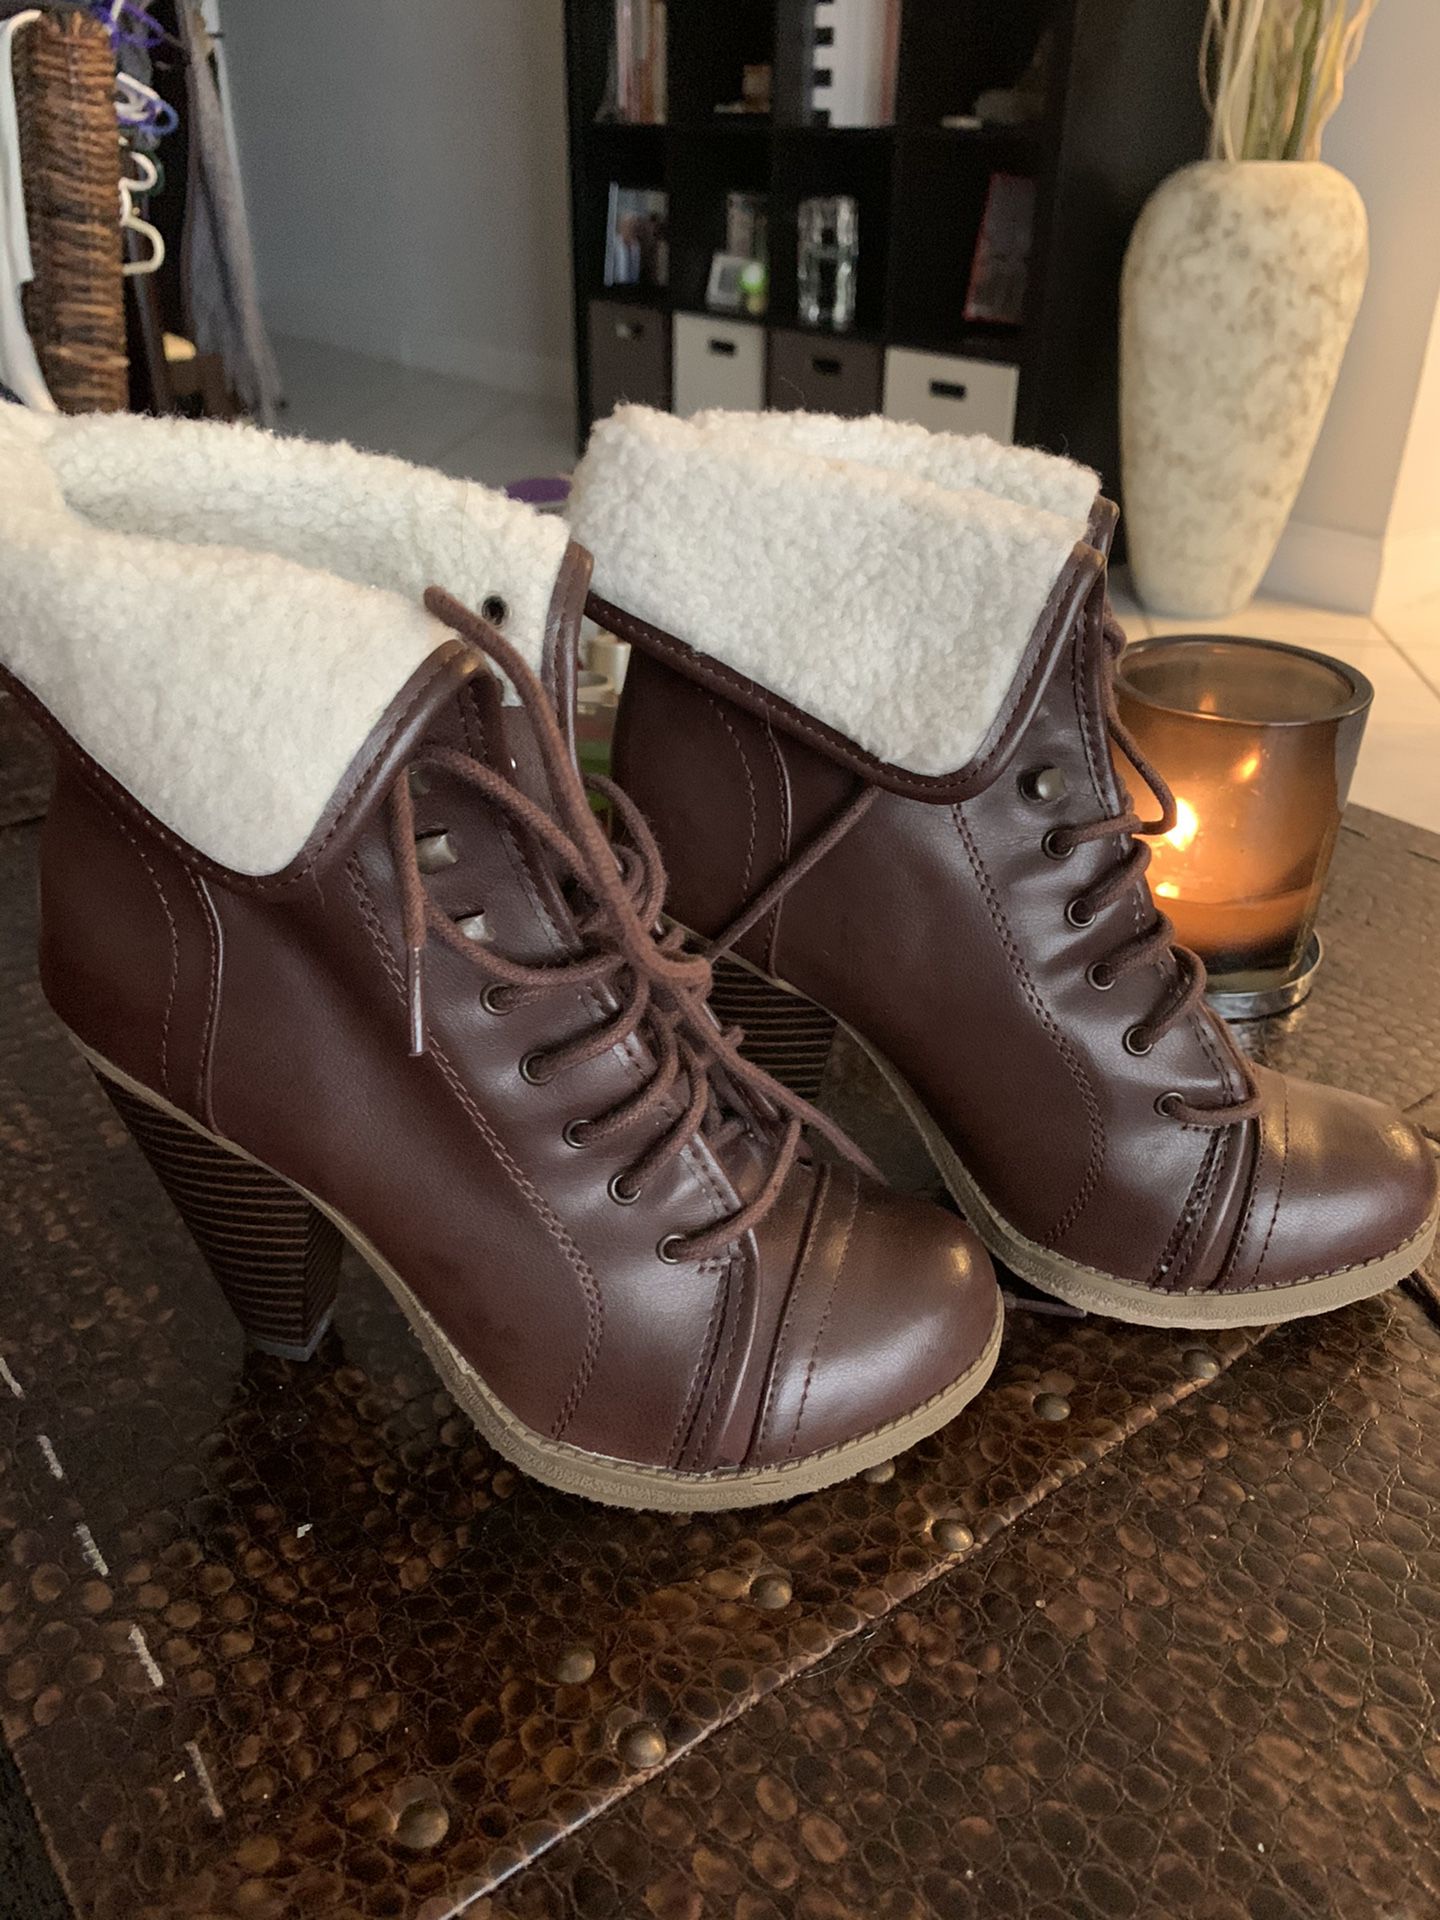 Boots - Mossimo Supply Co.